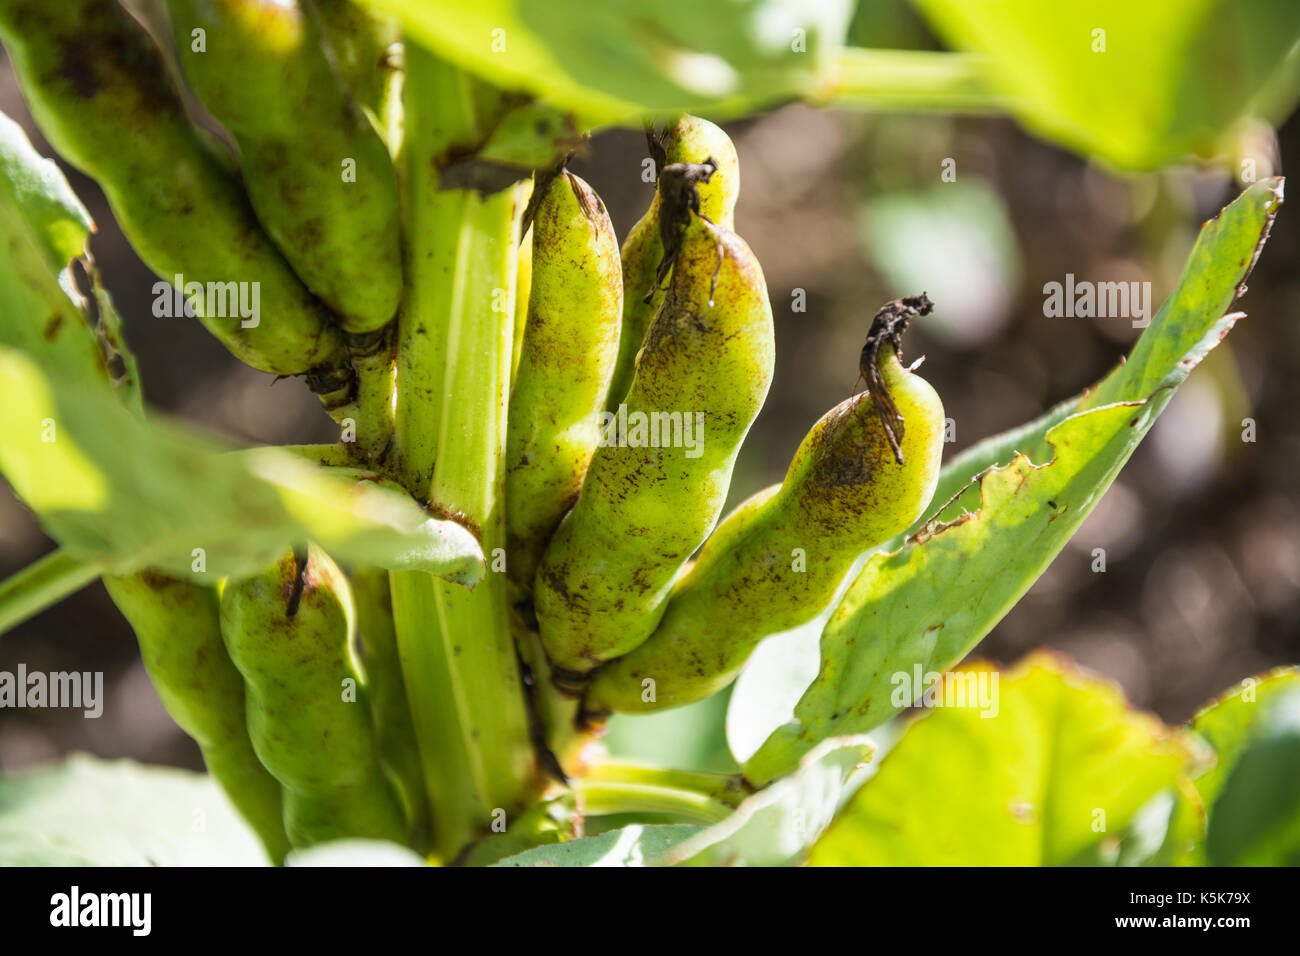 Broad Bean (Vicia faba, Fava beans) pods on the stalk in August, UK Stock Photo